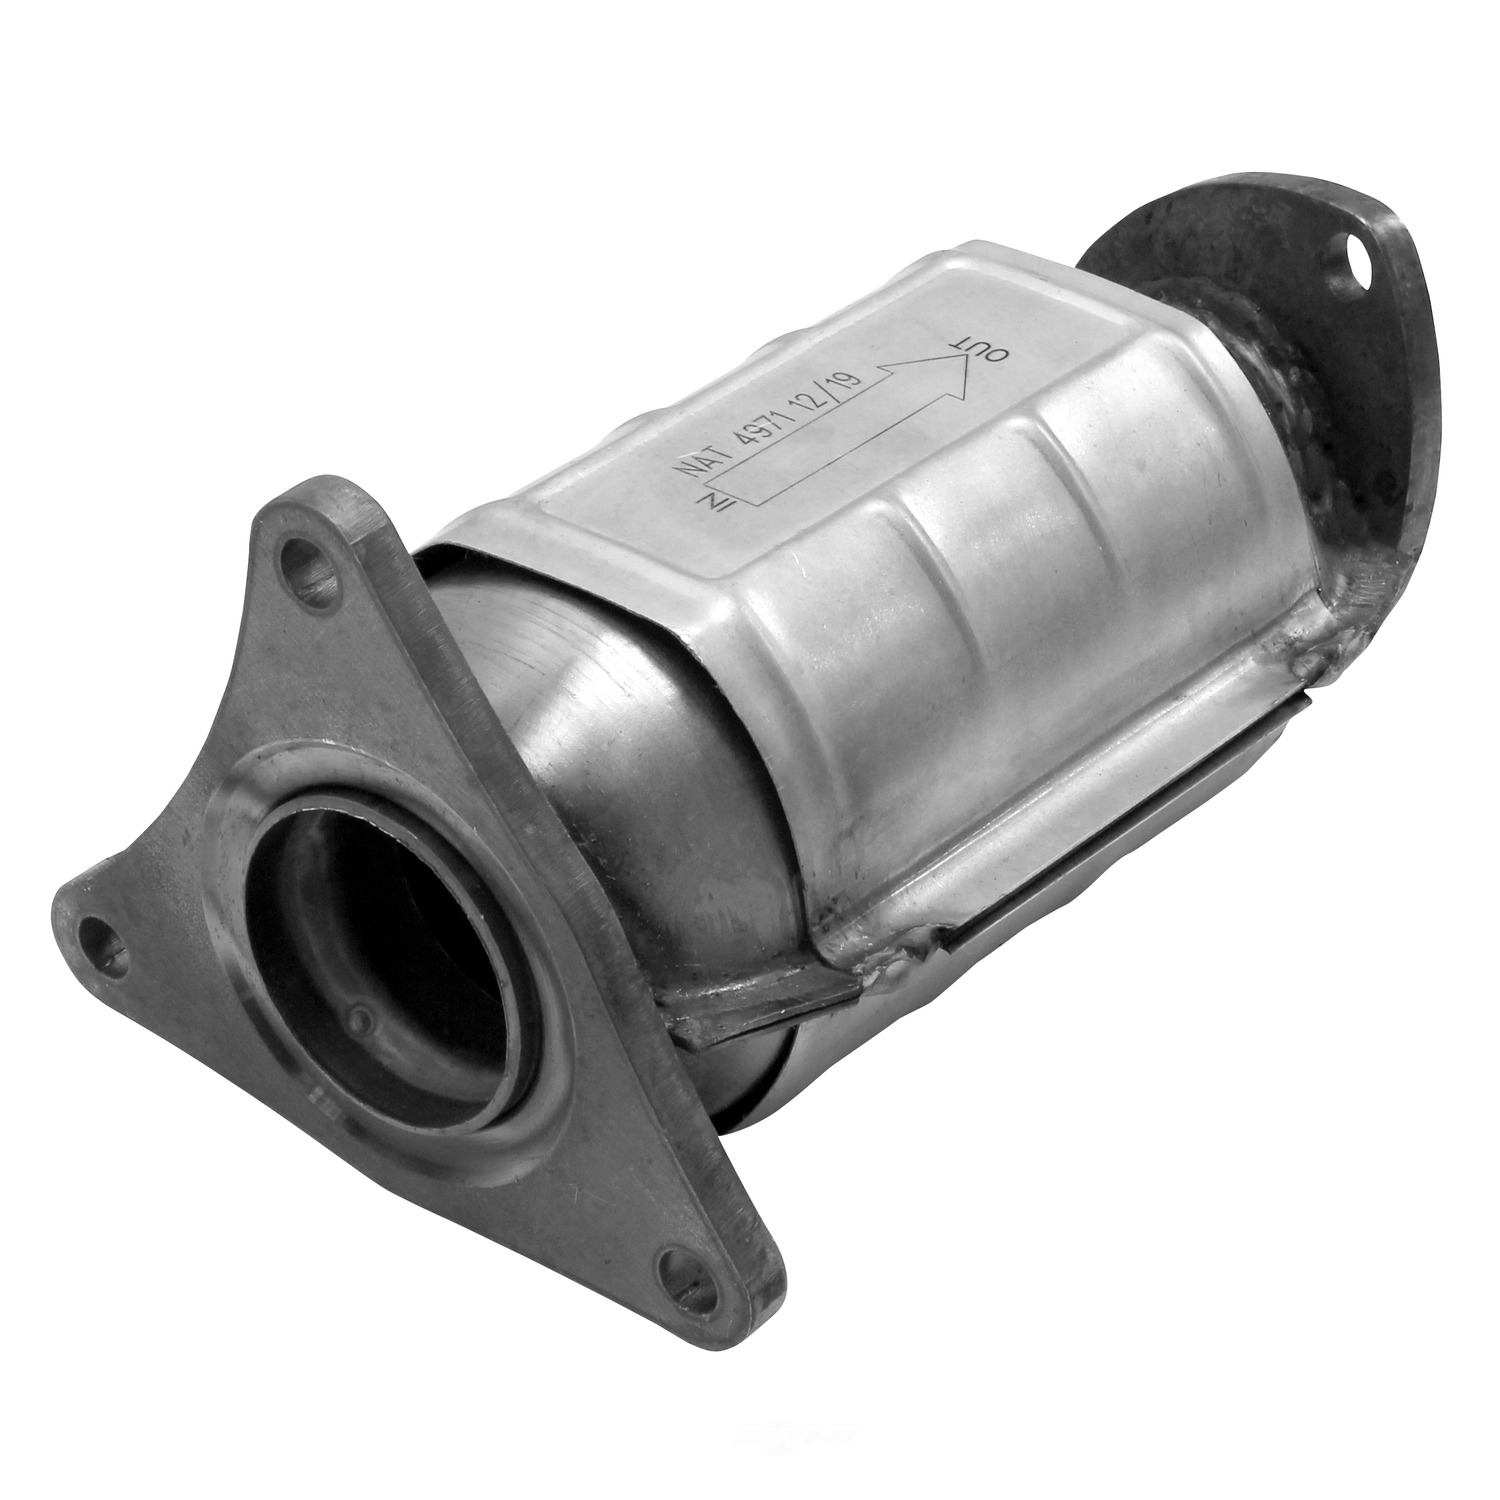 AP EXHAUST FEDERAL CONVERTER - Direct Fit Converter (Right) - APG 642702